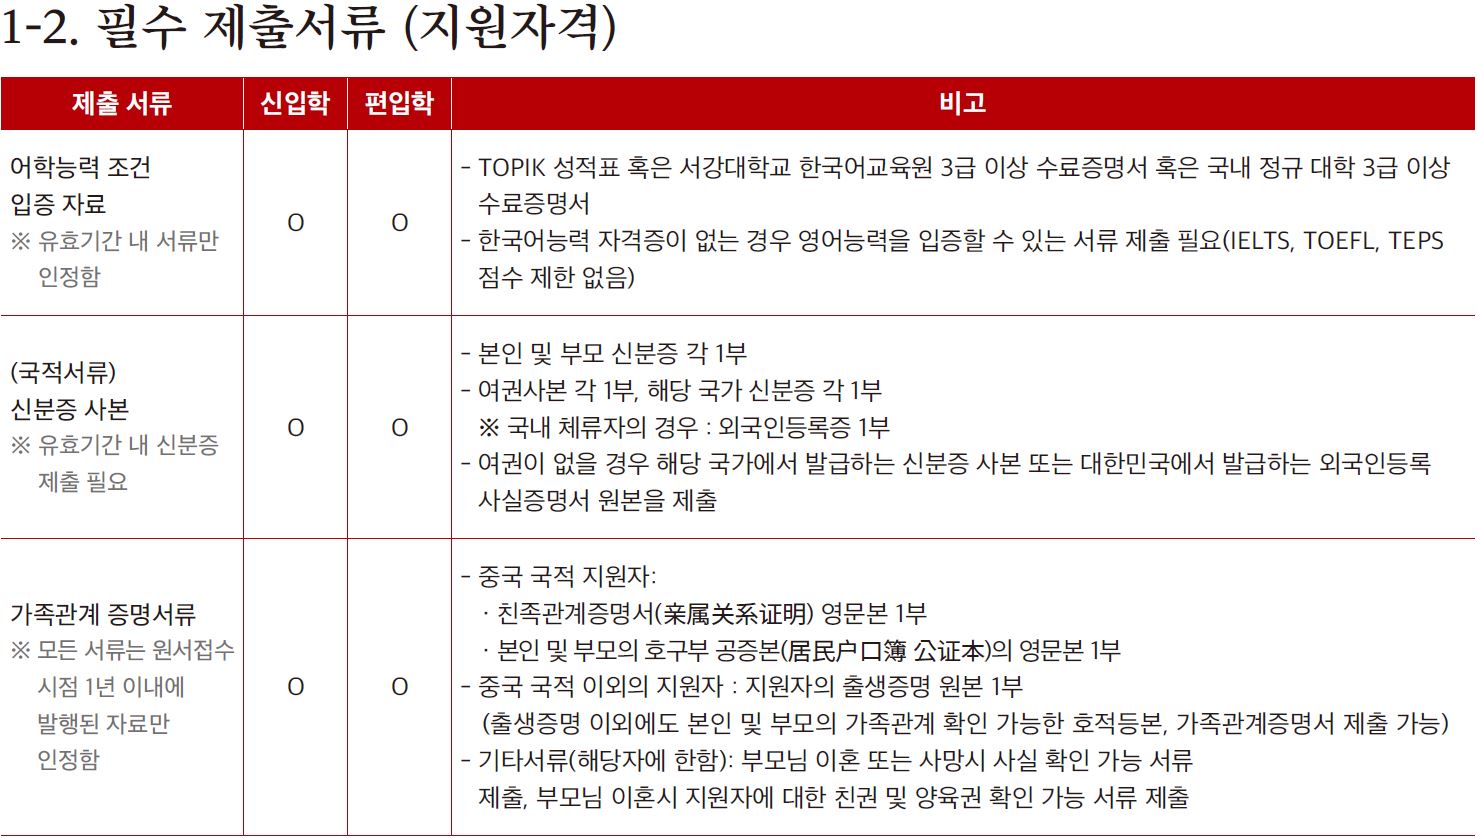 Sogang University Foreign Student Admission Required Documents_English Version 서강대 외국인전형 제출서류_영어본_07_제출서류.JPG